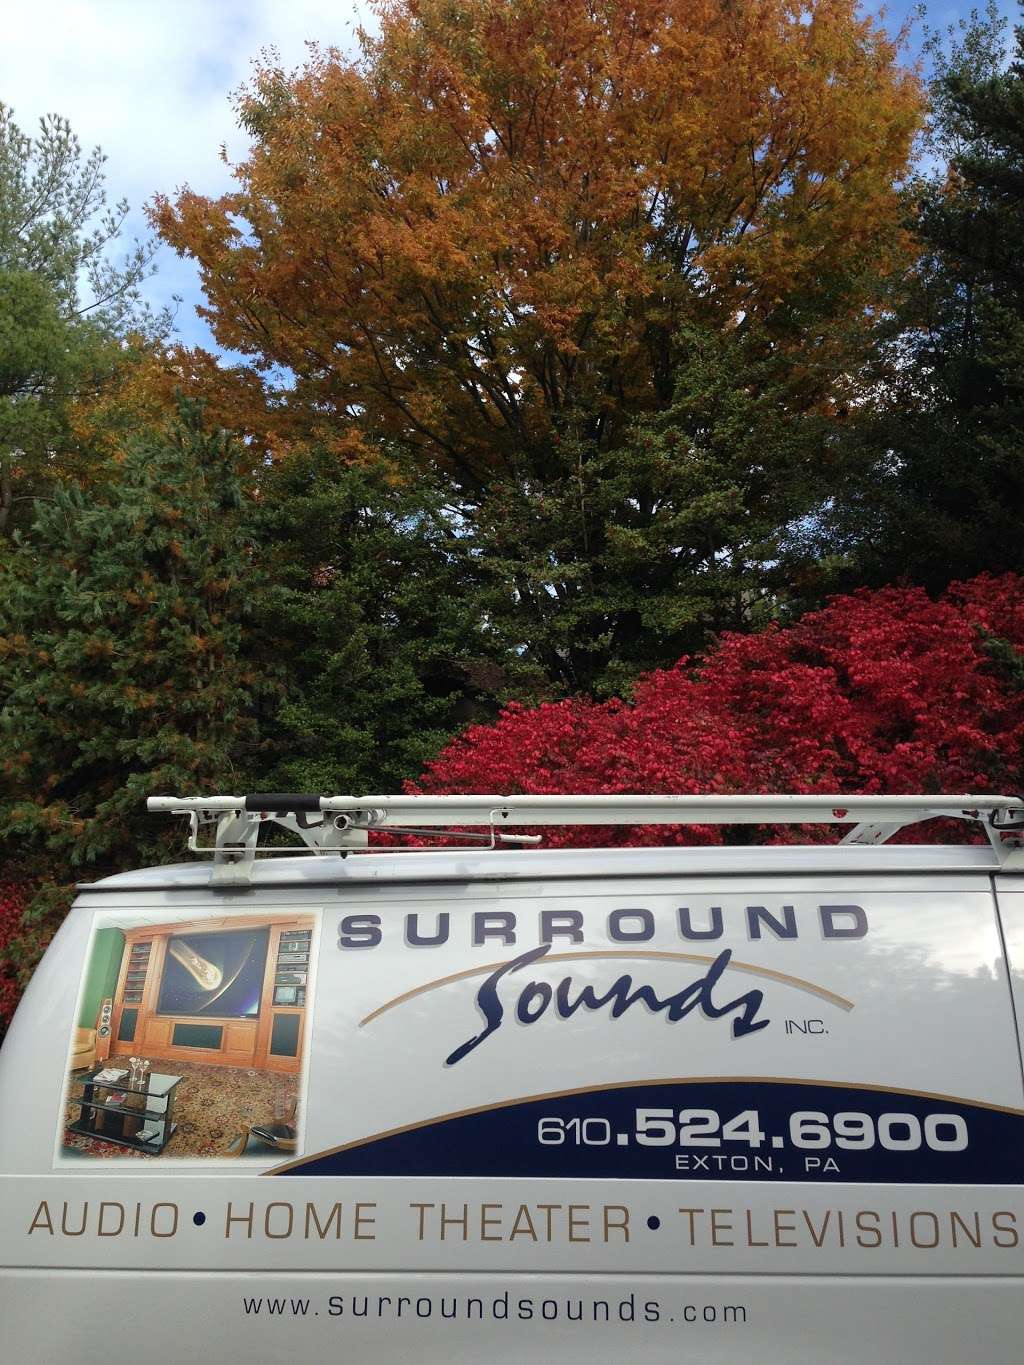 Surround Sounds | 215 E Lincoln Hwy, Exton, PA 19341 | Phone: (610) 524-6900